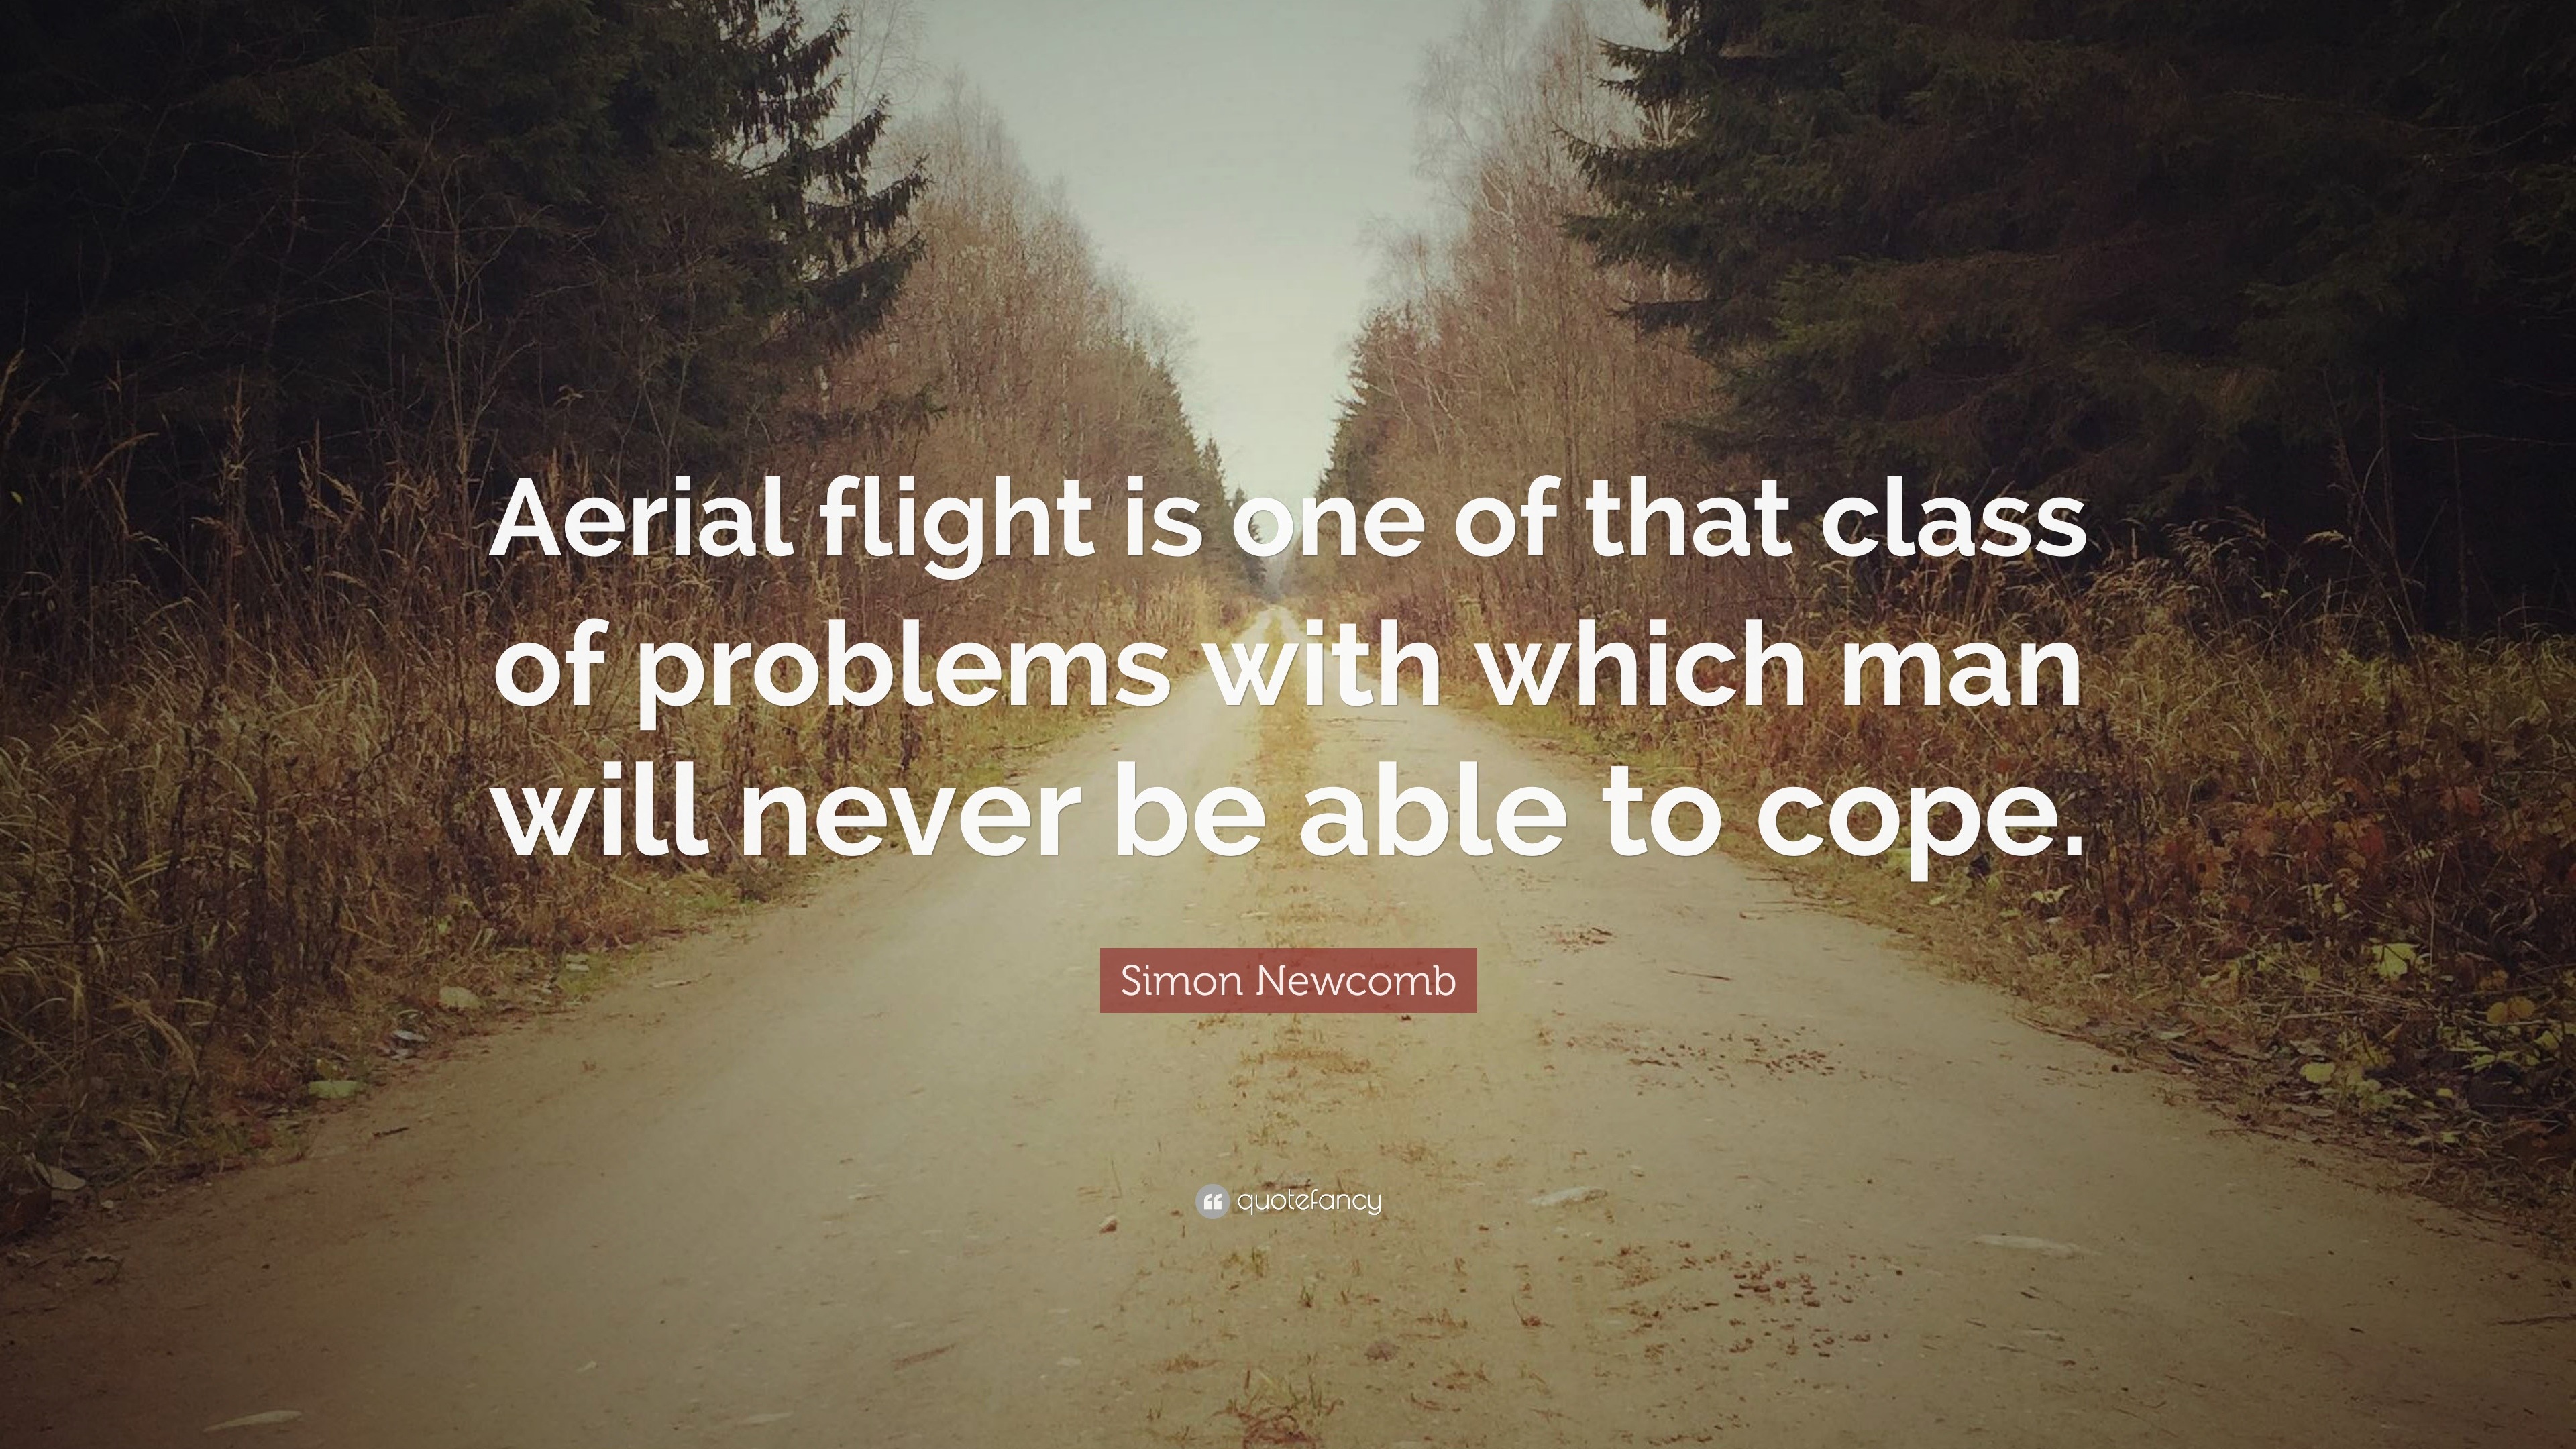 Simon Newcomb Quote: “Aerial flight is one of that class of problems ...